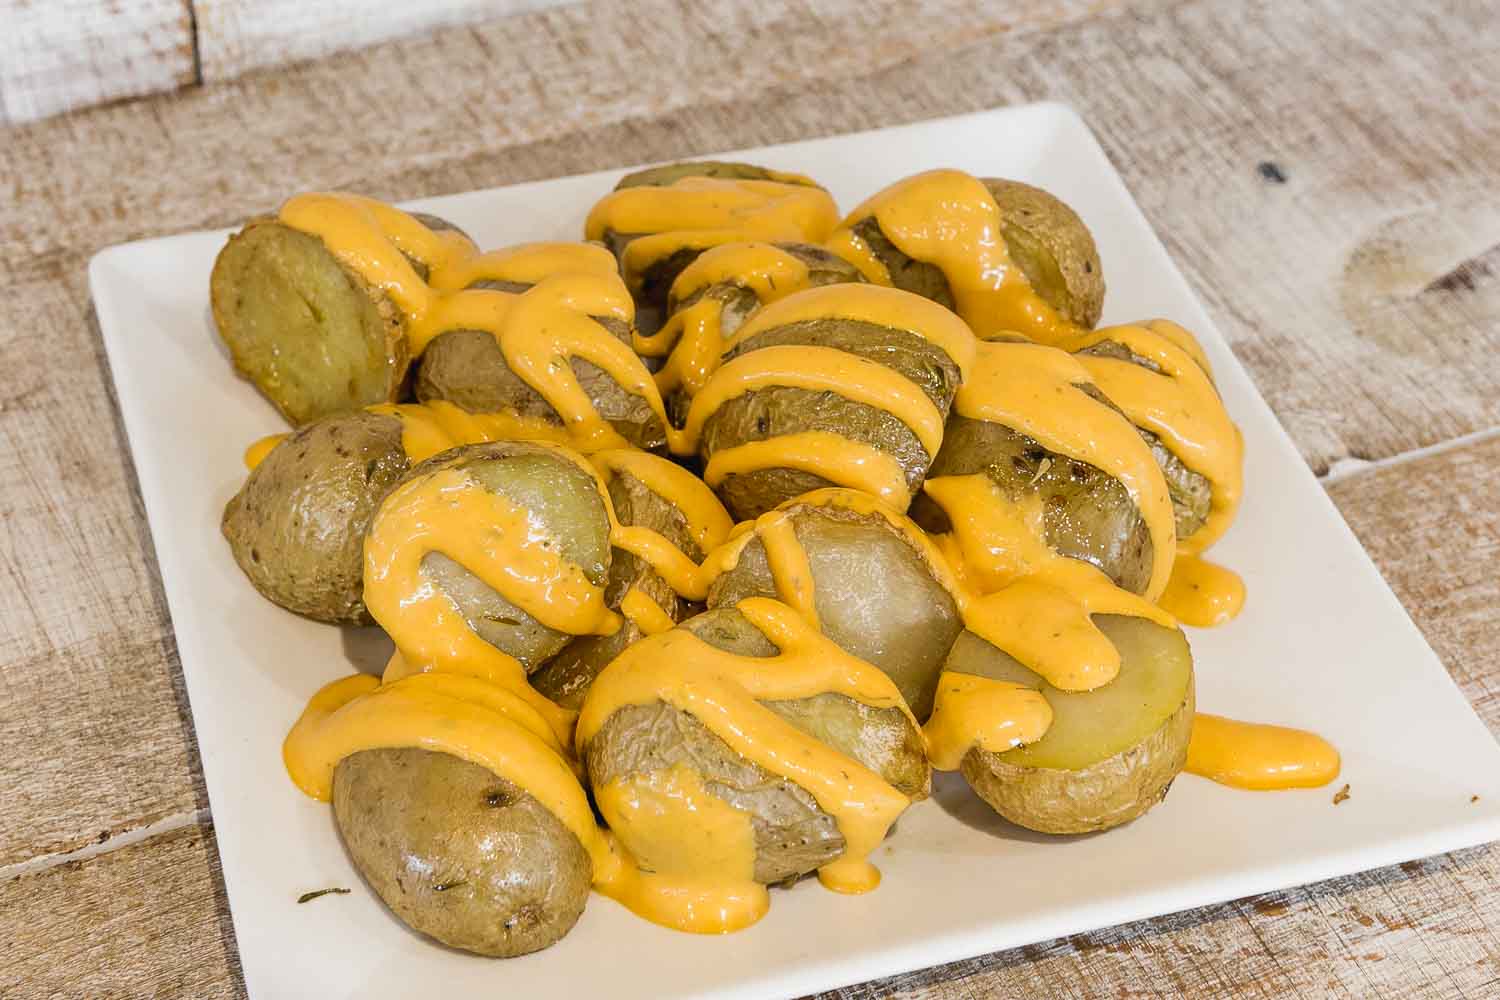 Potato with Argentine sauce, cheese or spicy